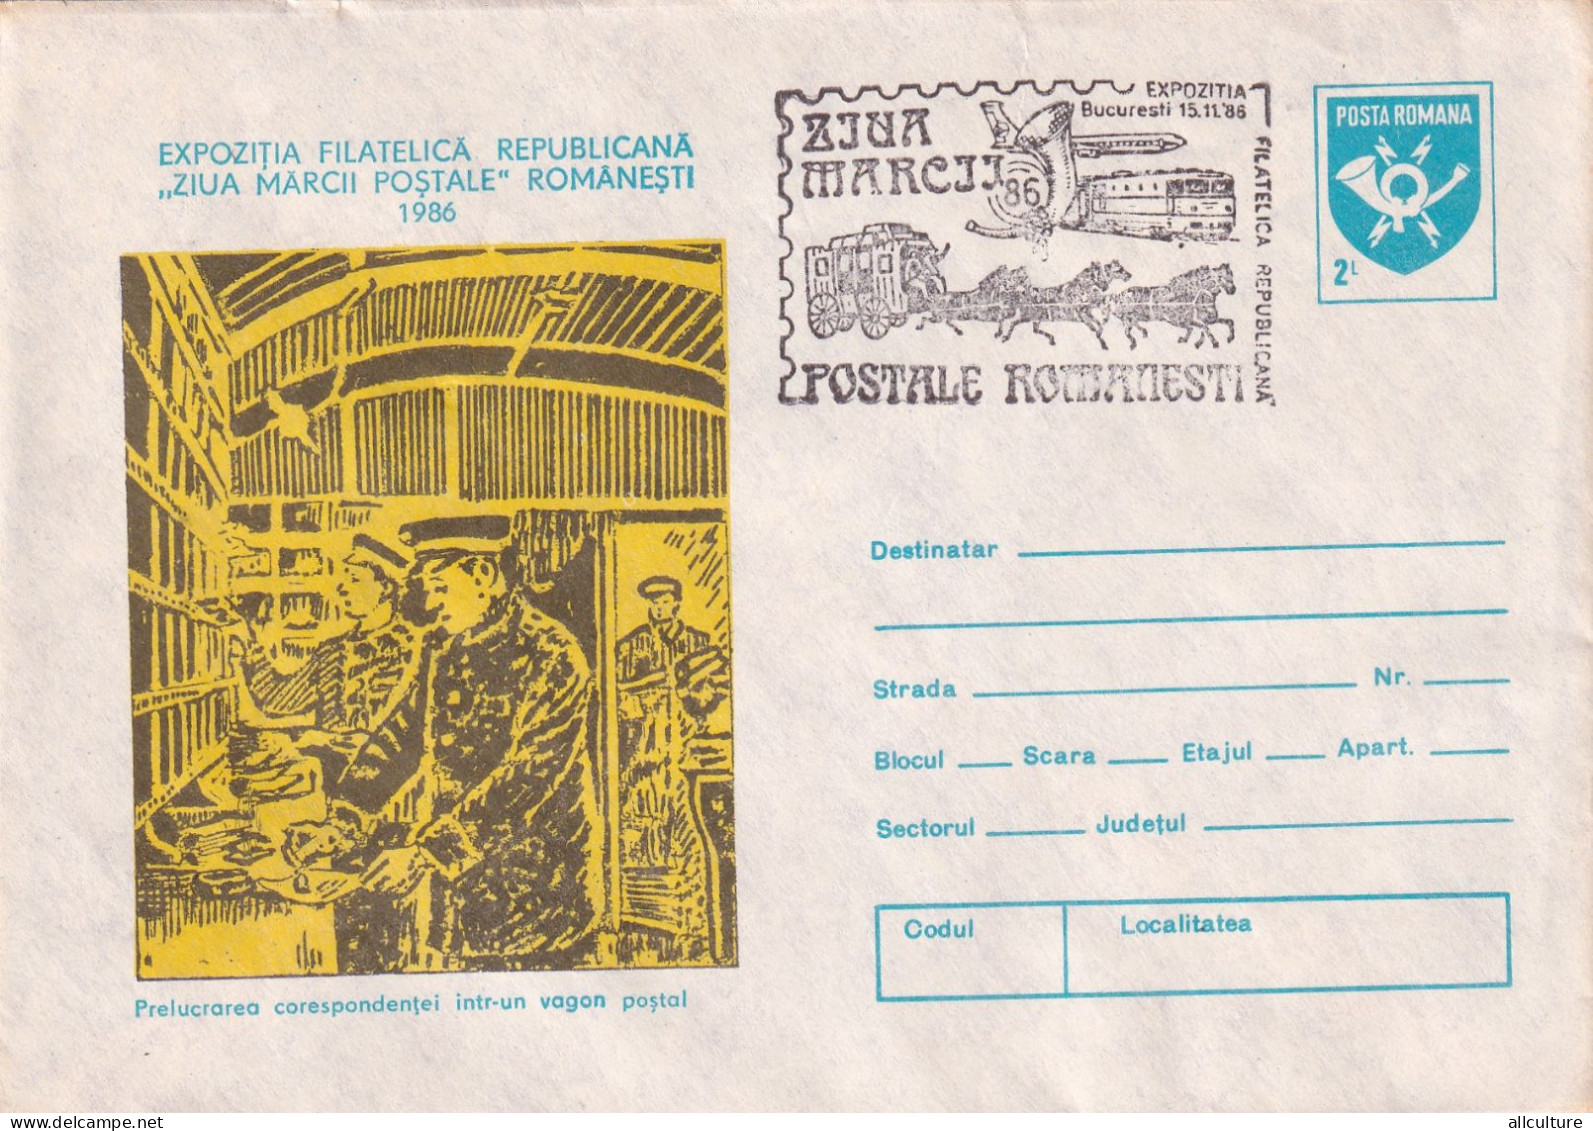 A24741 - PROCESSING CORRESPONDENCE IN A POSTAL WAGON  ROMANIA COVER STATIONERY, 1986 - Entiers Postaux